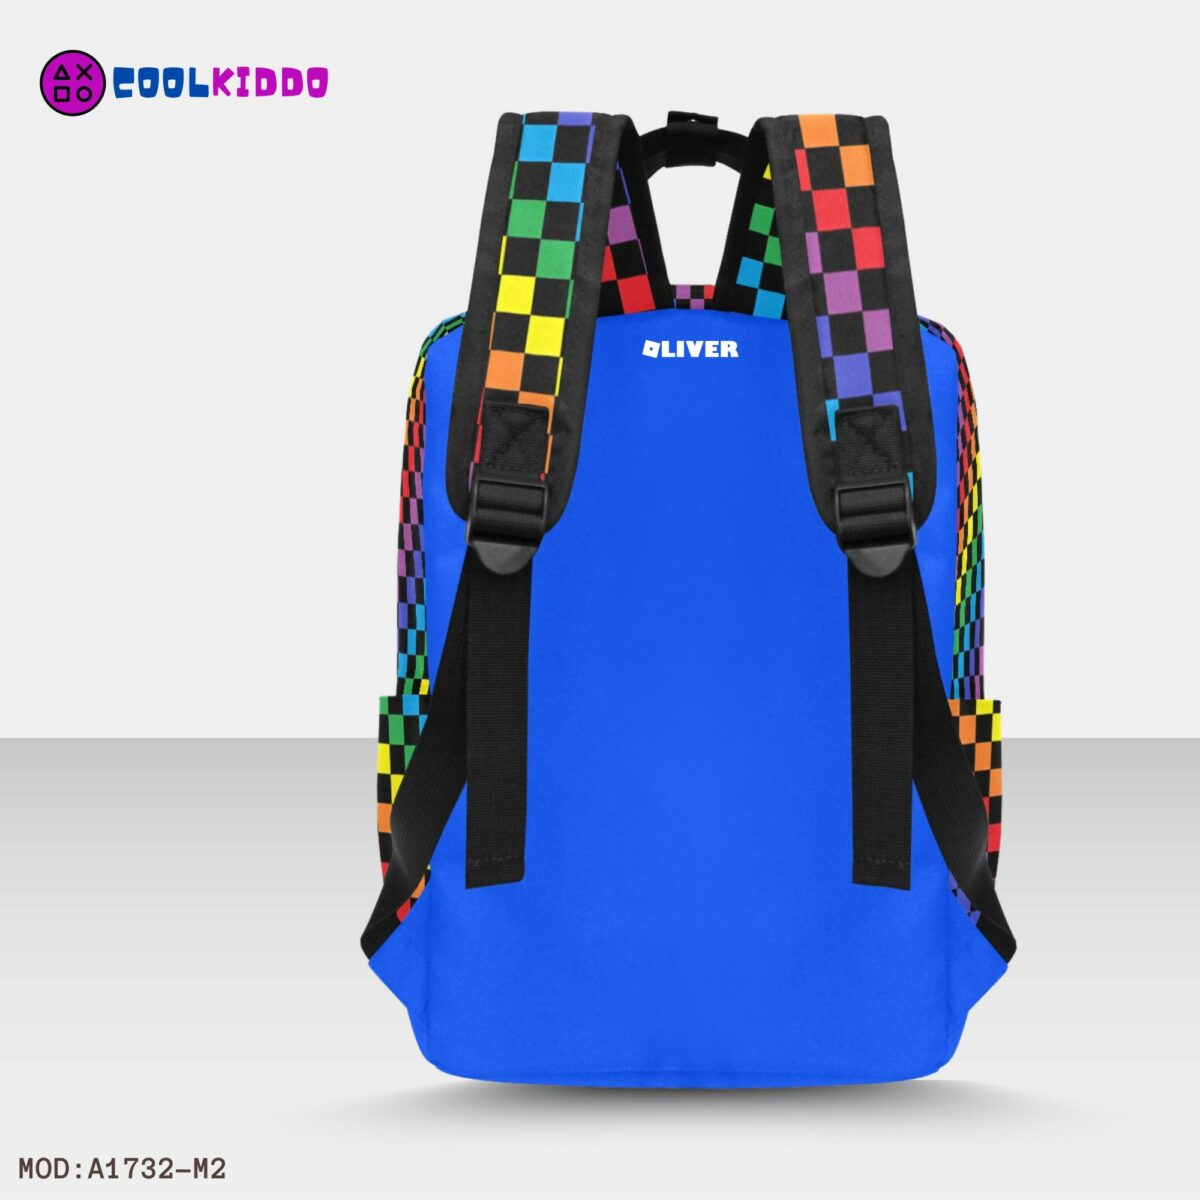 Blue Rainbow Friends Twin Handle Backpack – Name Personalization Optional Cool Kiddo 18